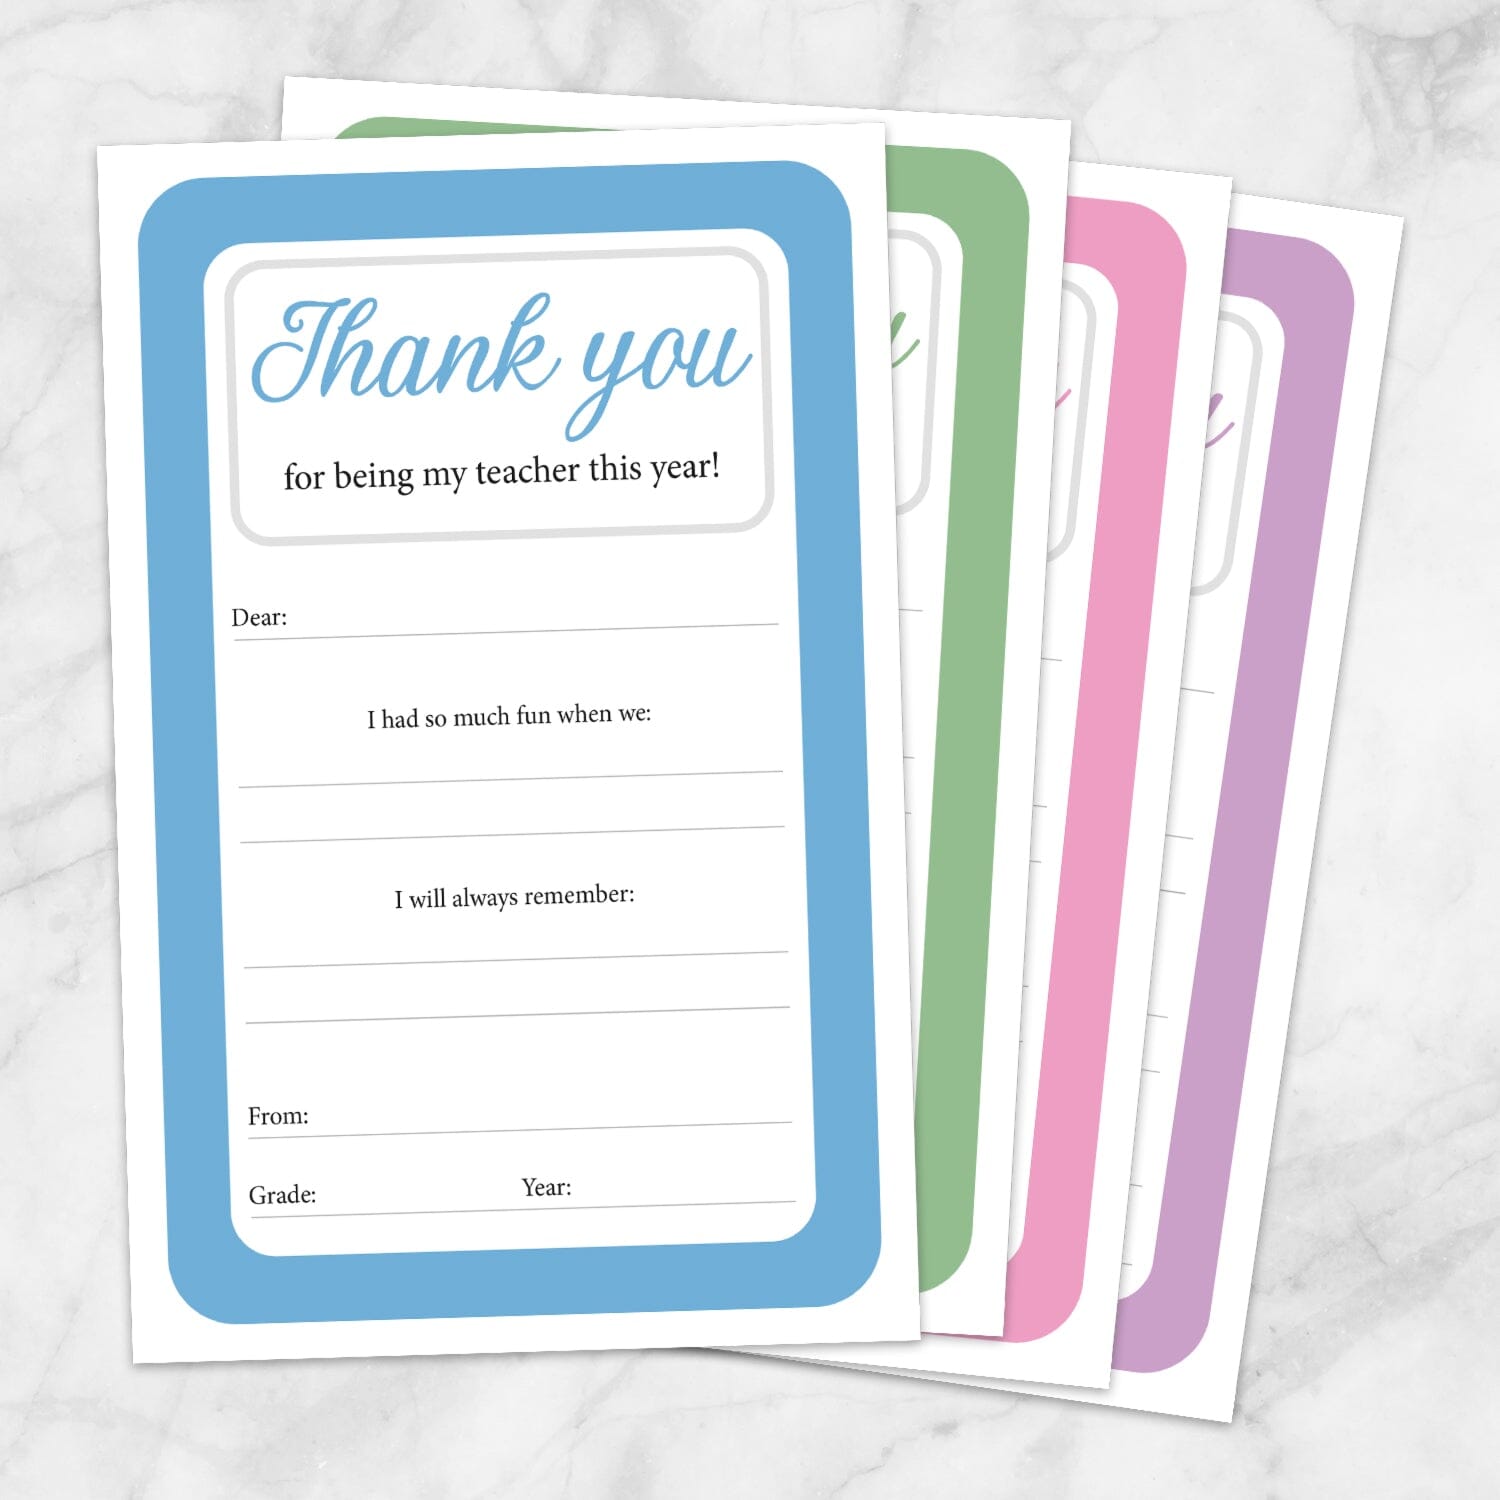 Printable Teacher Thank You Notes - 2 Per Page, BUNDLE in 4 Colors at Printable Planning. Example of the 4 different thank you notes.